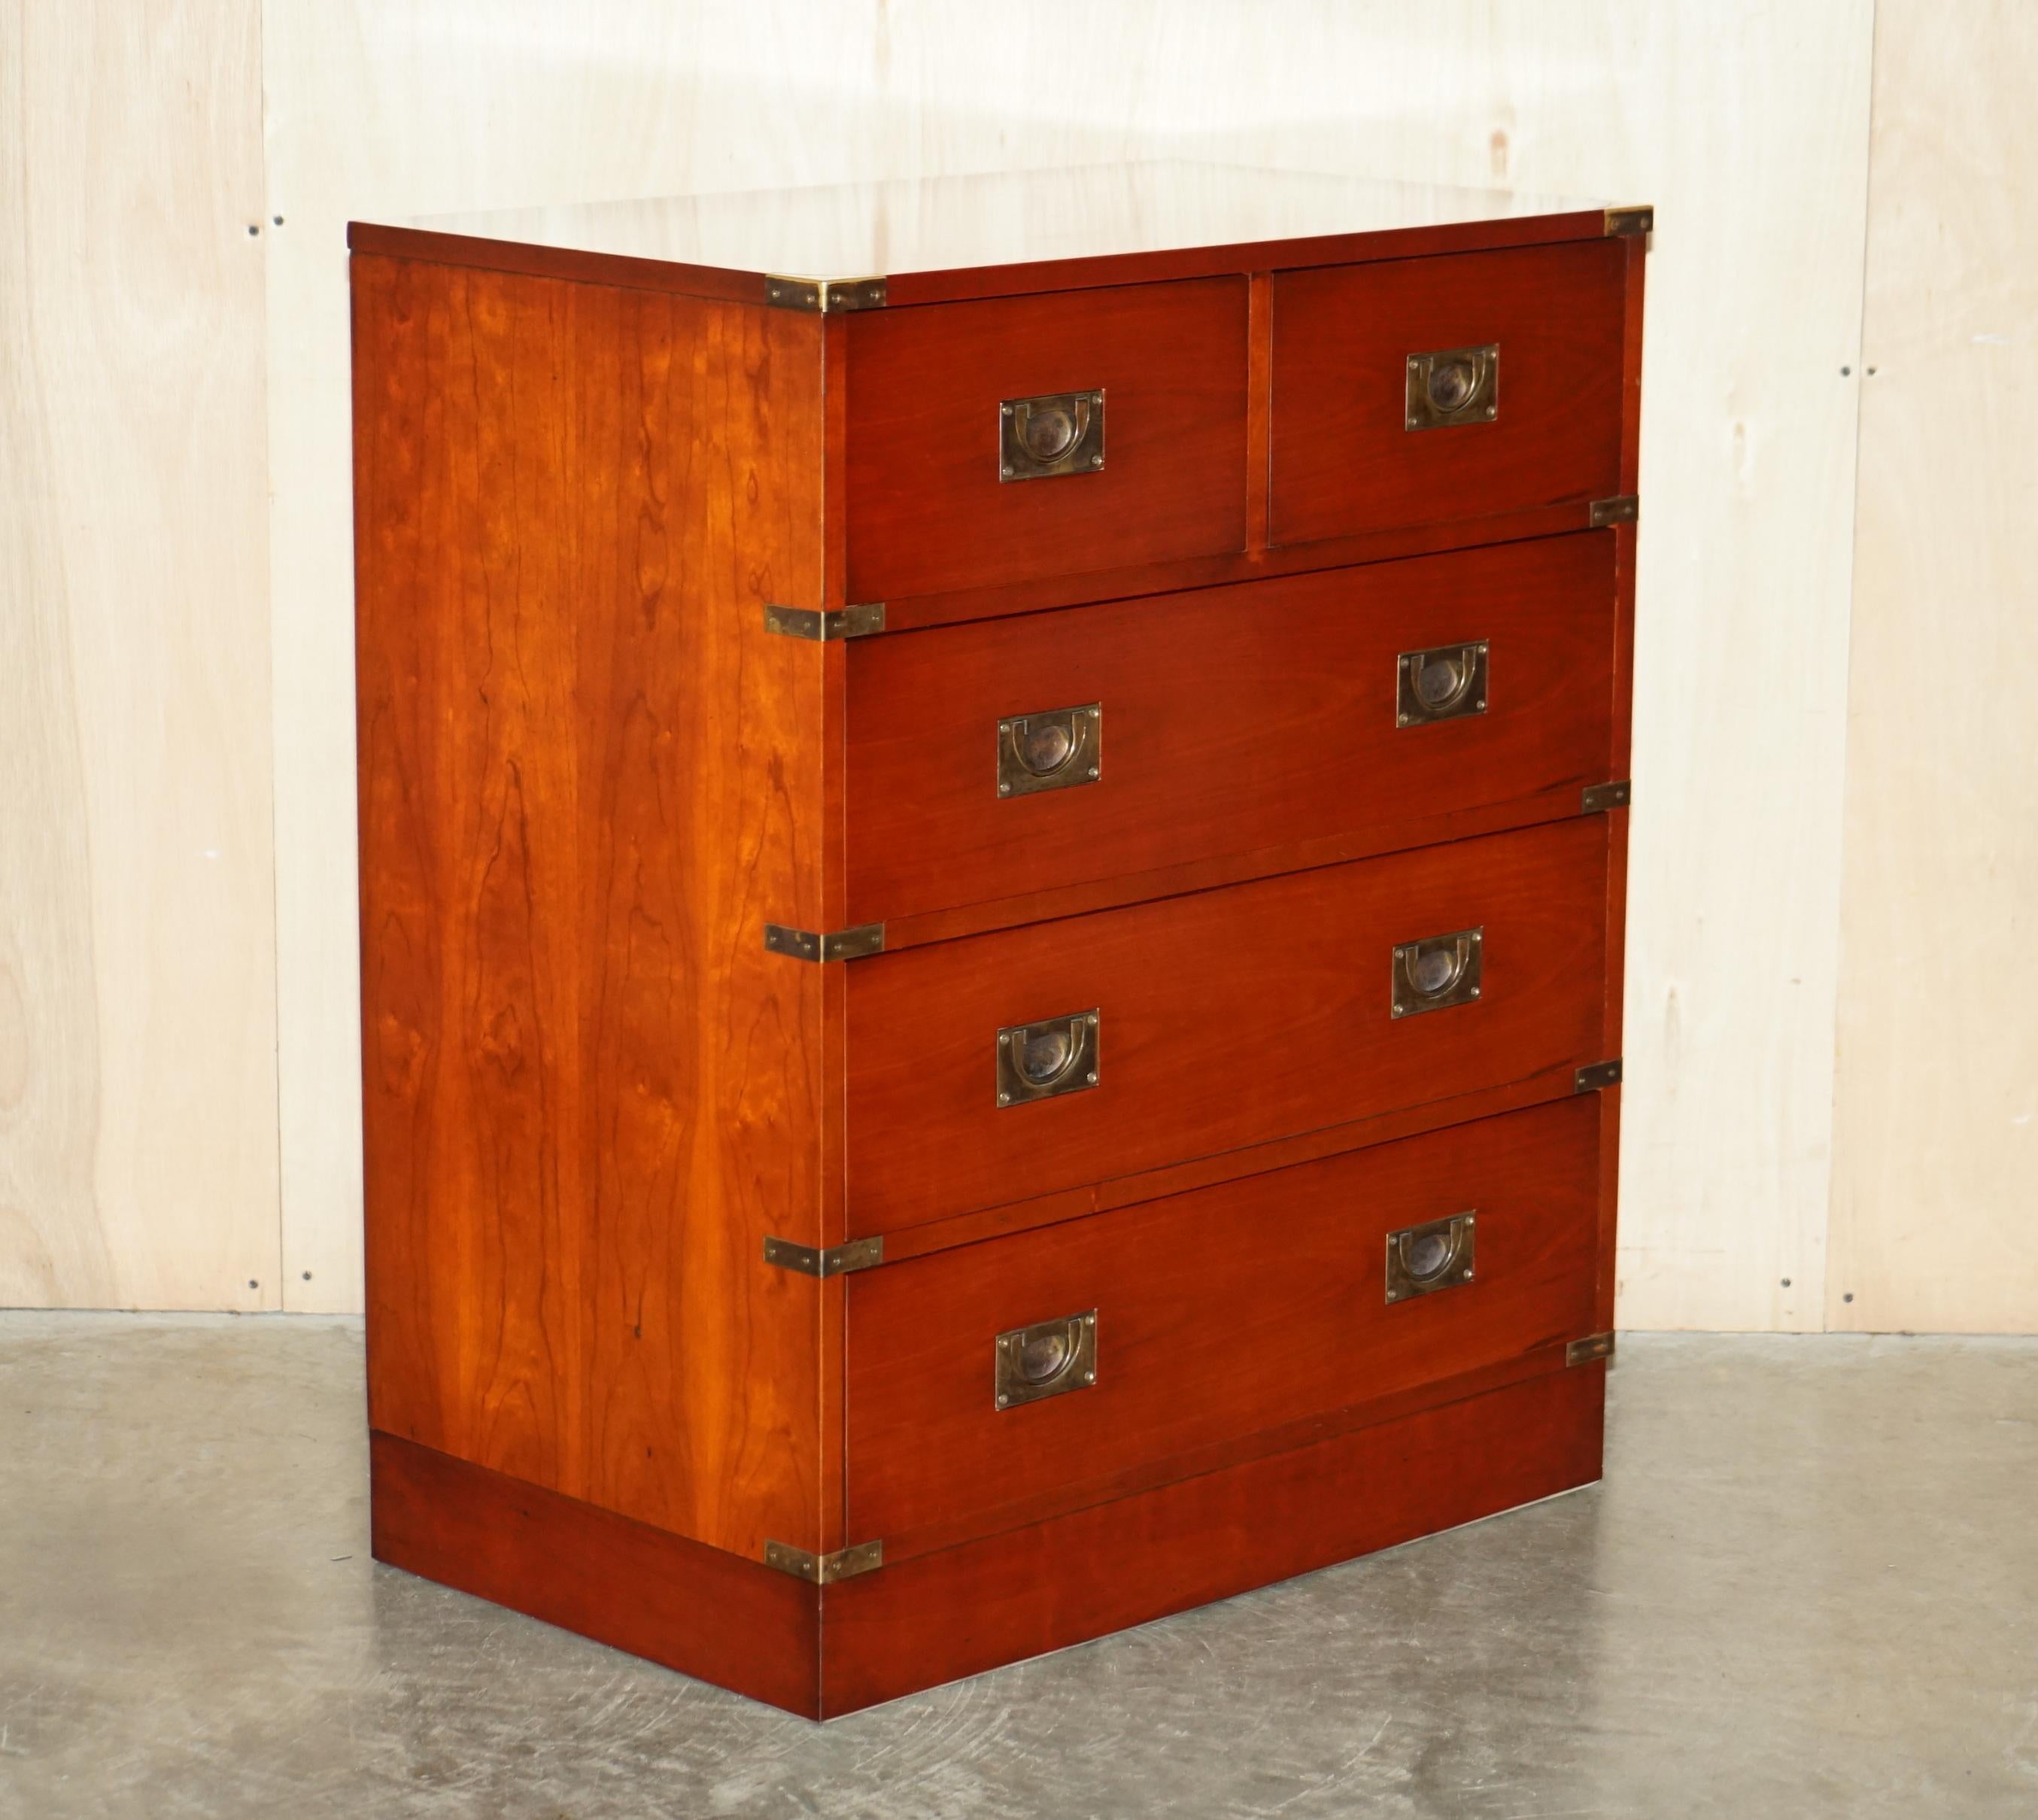 We are delighted to offer for sale this very nice vintage chest of Military Campaign drawers

A decorative and functional chest of drawers, made in the Campaign style in oak with brass finish handles 

We have cleaned waxed and polished it from